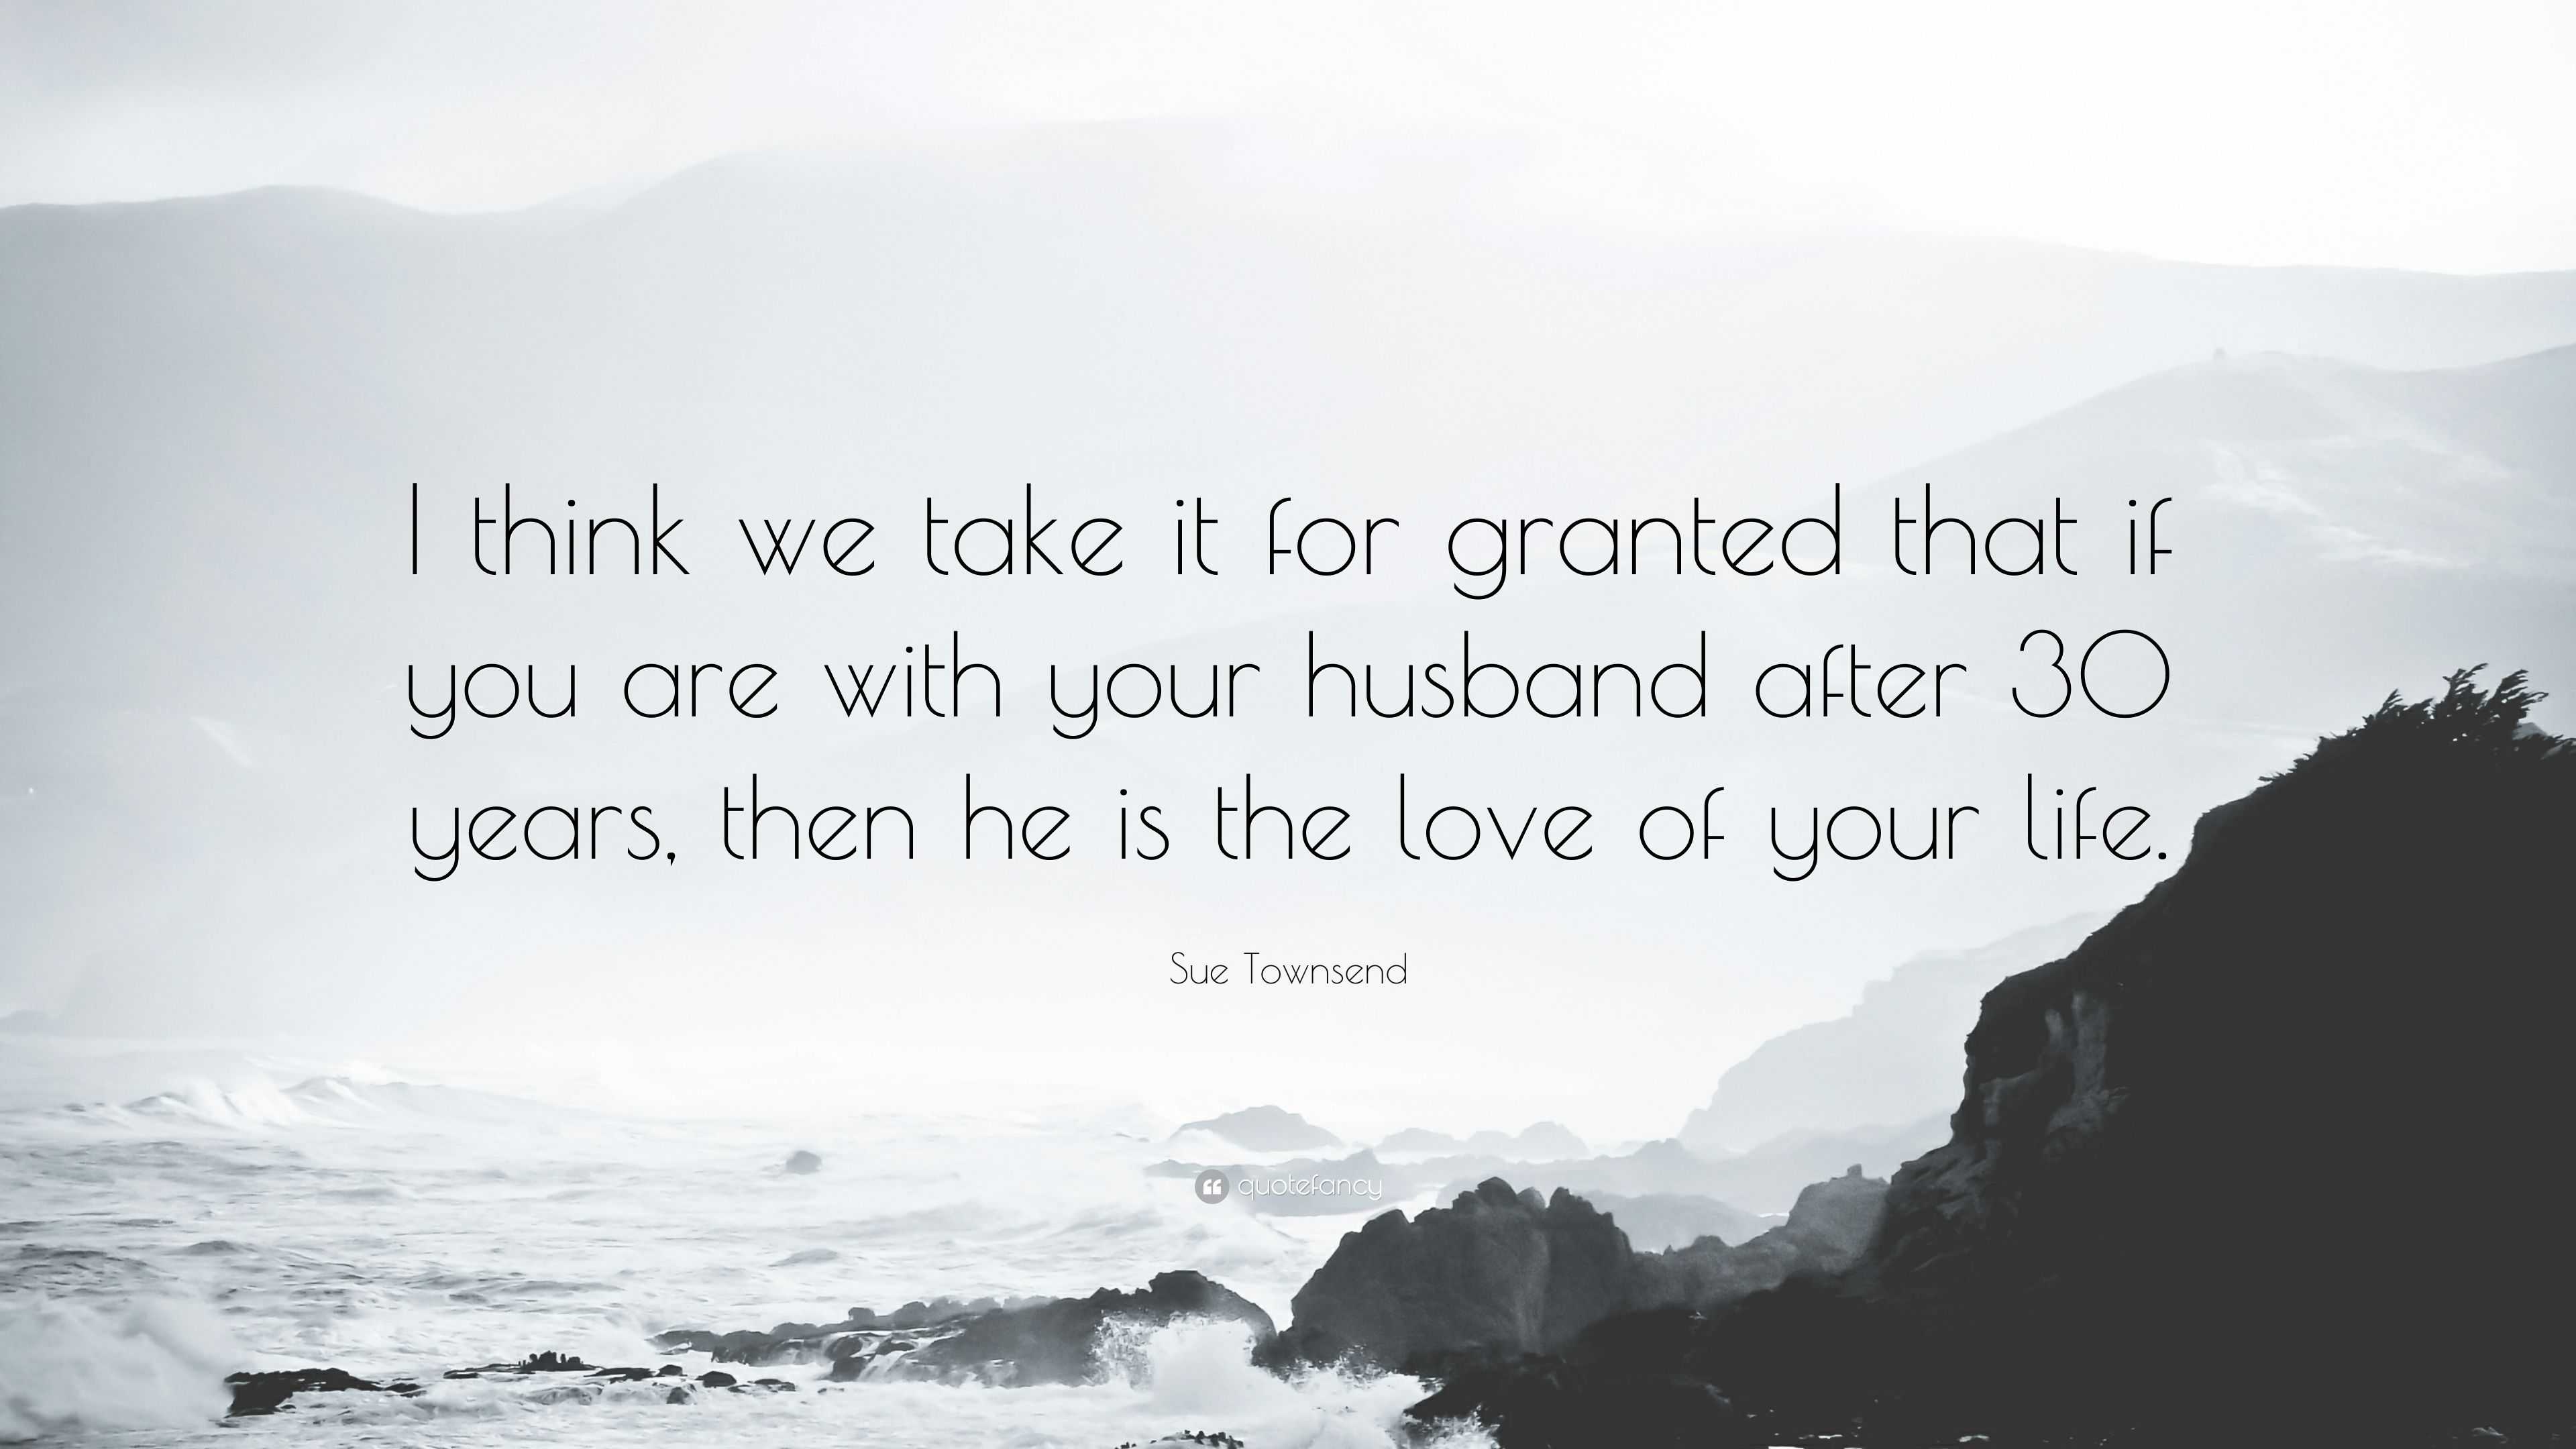 Quotes granted wife for taken Sermons about